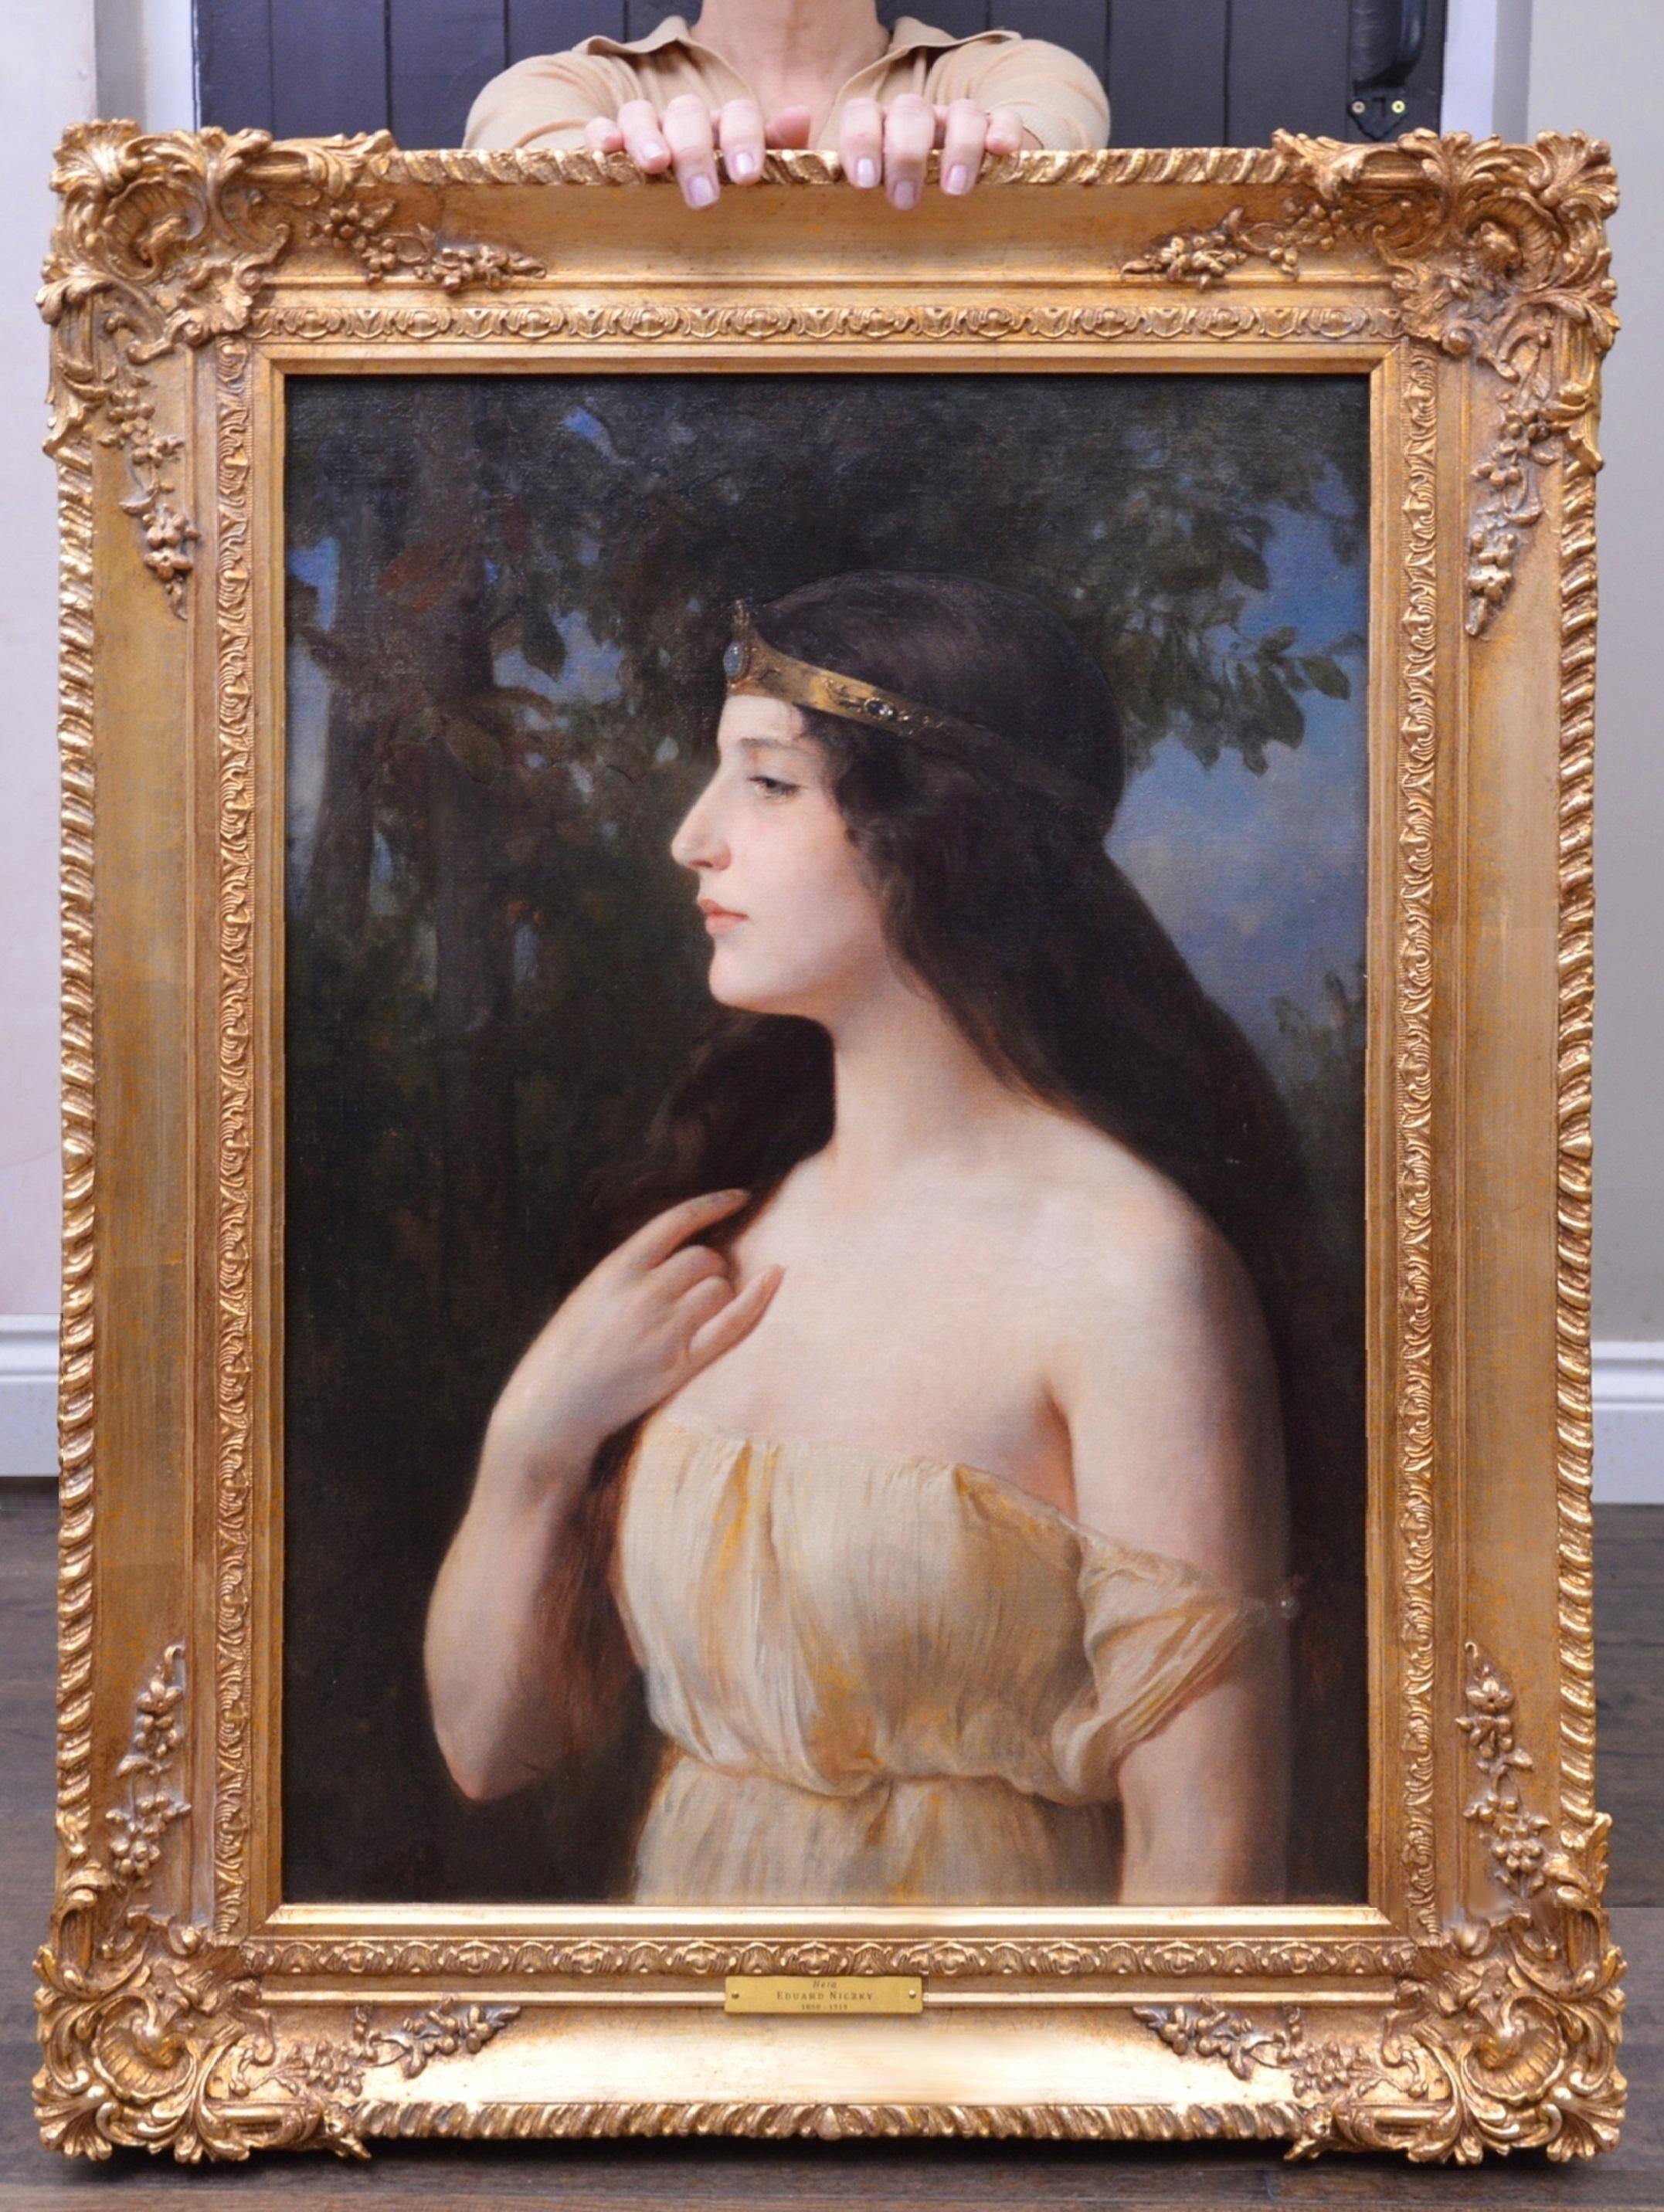 Eduard Niczky Portrait Painting - Goddess Hera - 19th Century Neoclassical Oil Painting of Ancient Greek Mythology